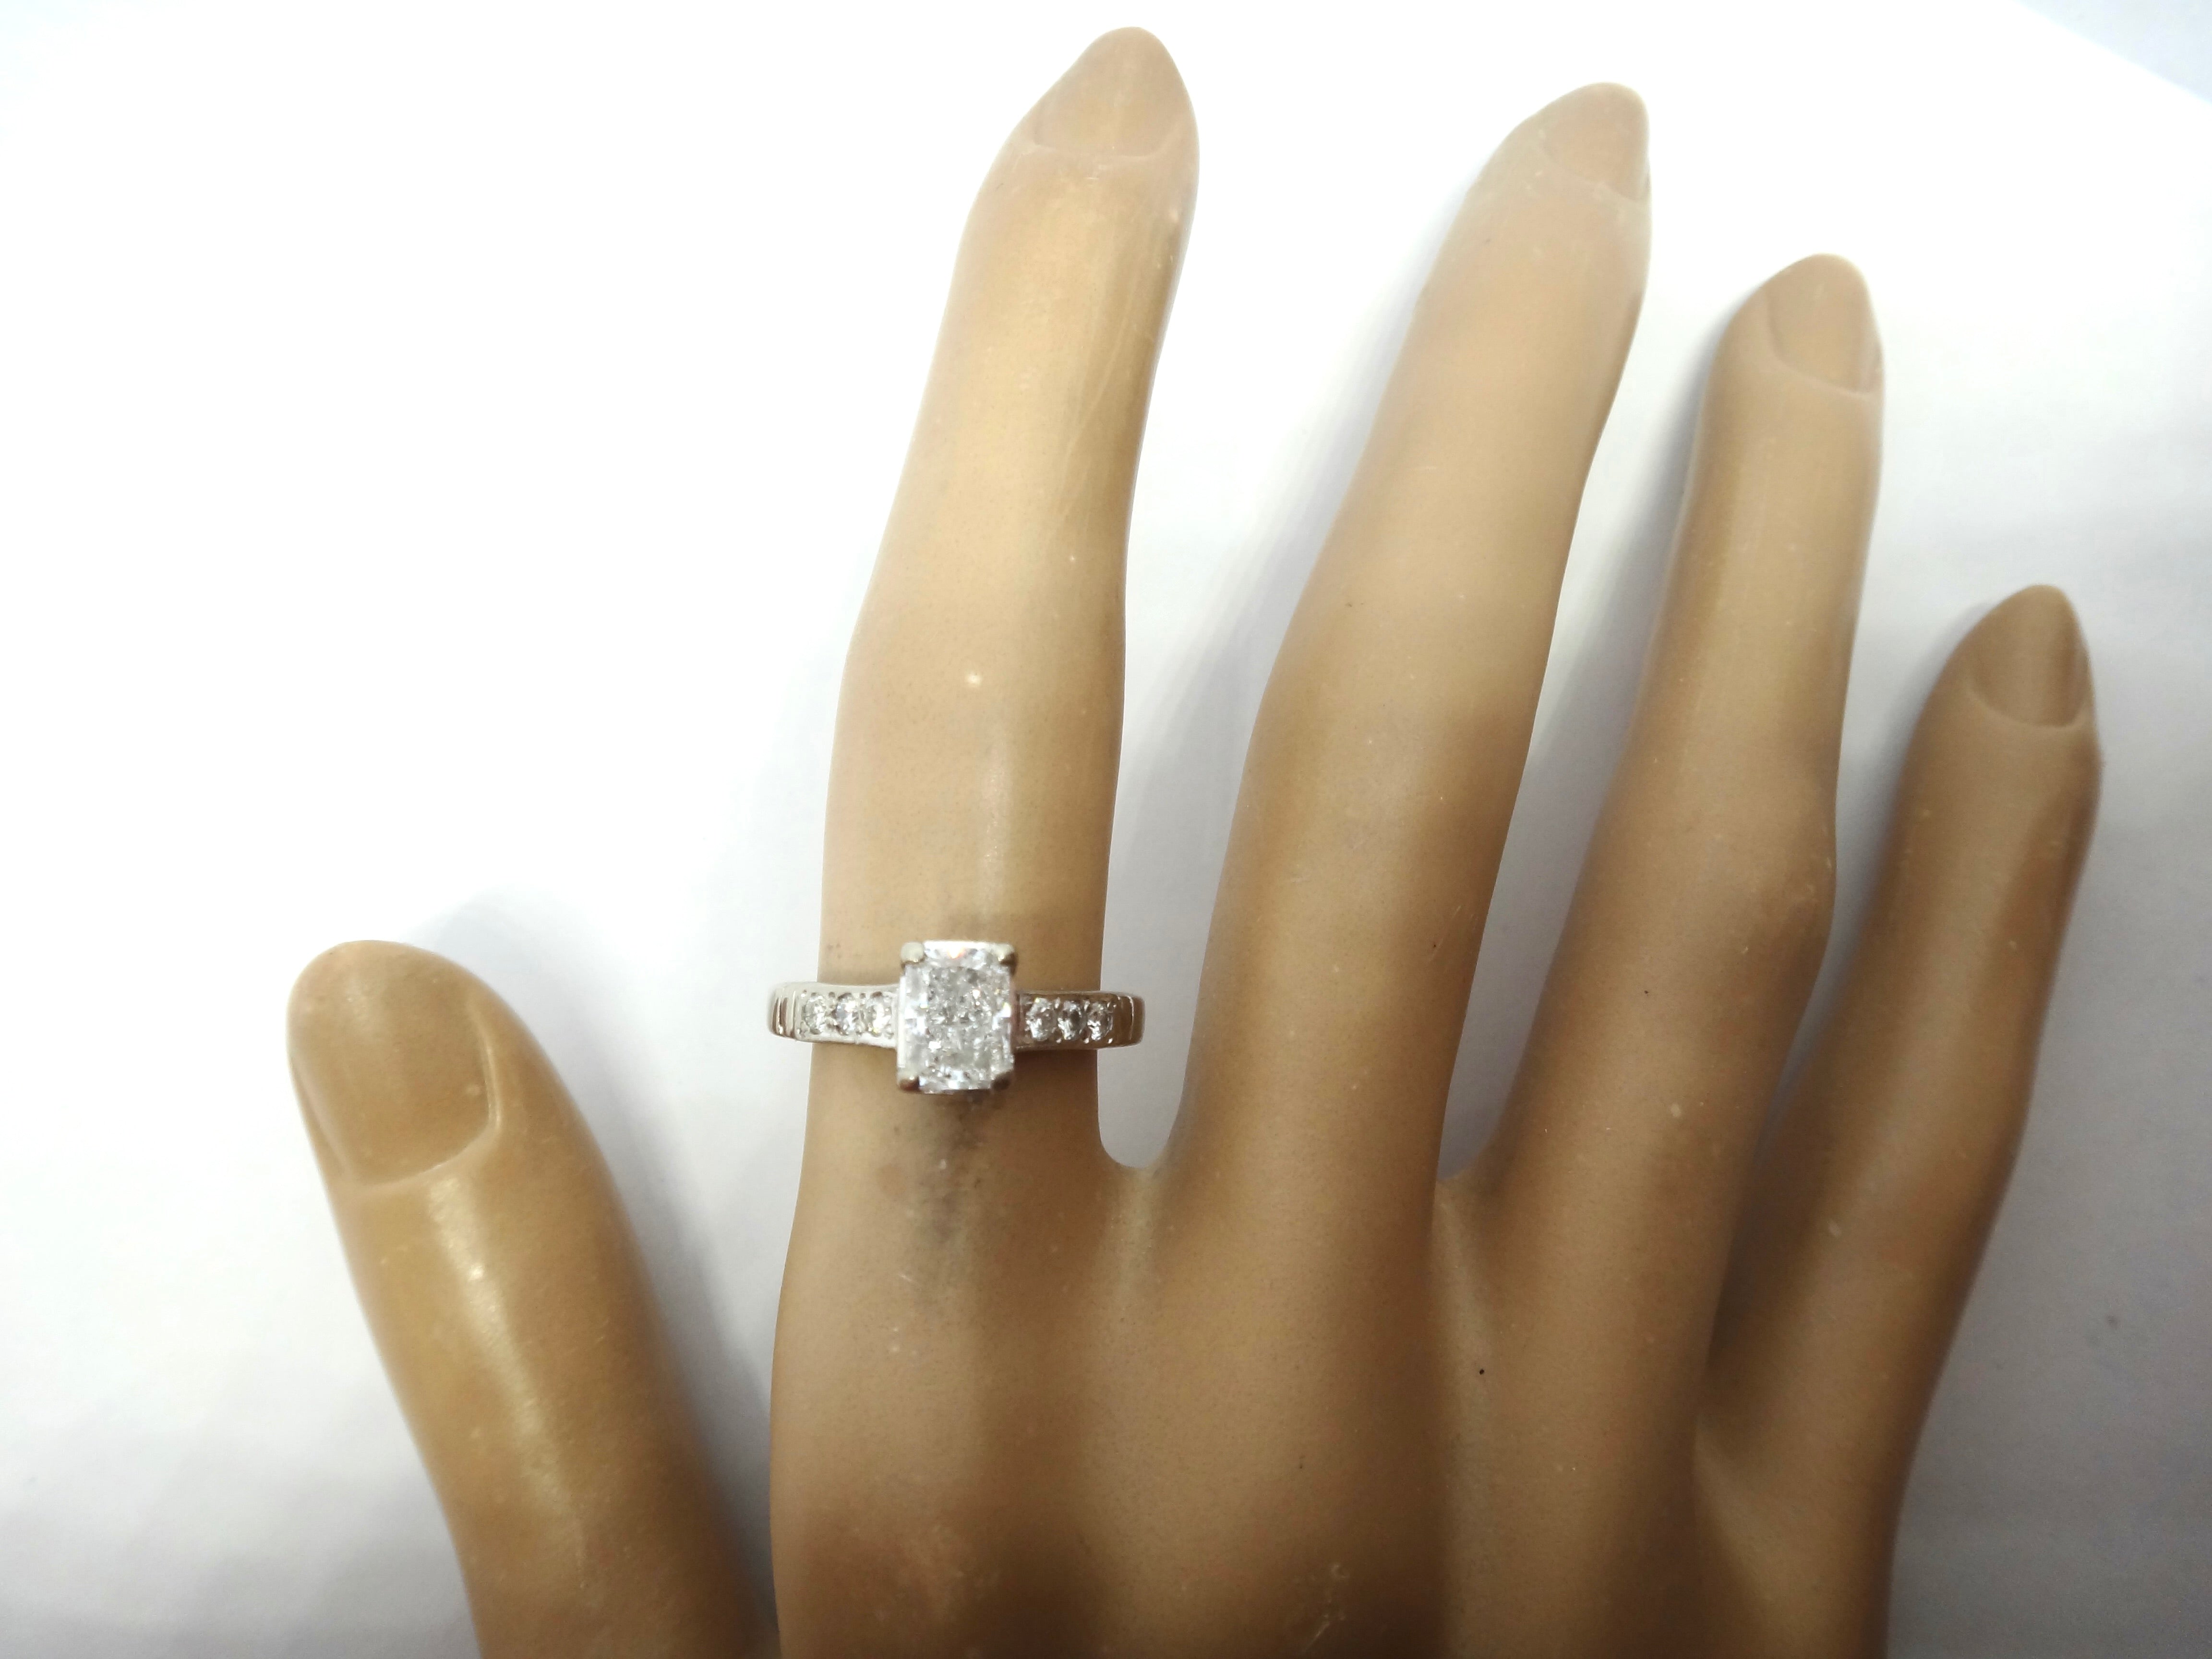 HANDMADE 18ct White Gold & Radiant Cut Diamond Ring with GIA & VAL $13,450